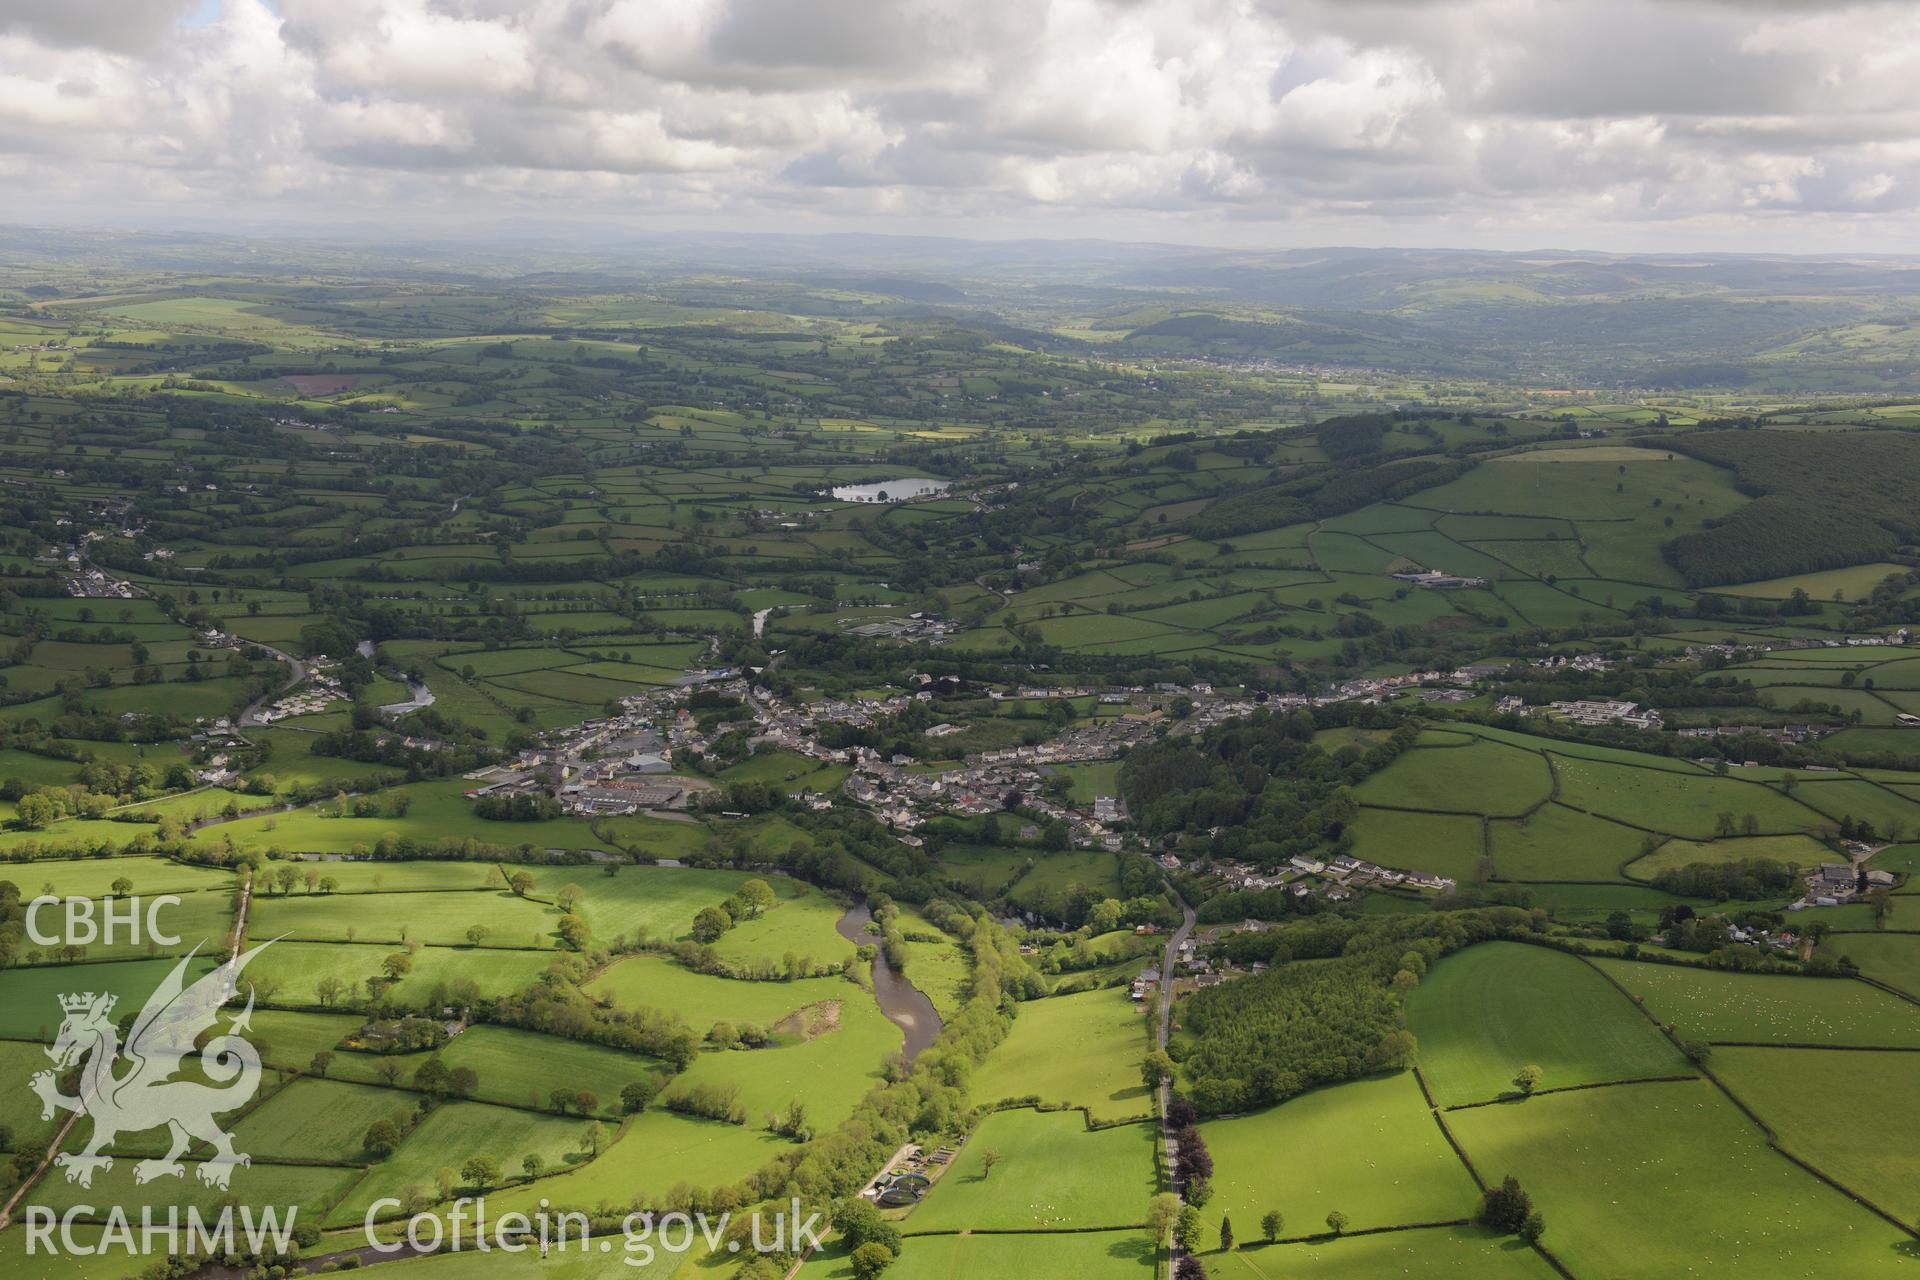 Landscape view looking north east at Llanybydder with Llyn Pencarreg in the distance. Oblique aerial photograph taken during the Royal Commission's programme of archaeological aerial reconnaissance by Toby Driver on 3rd June 2015.